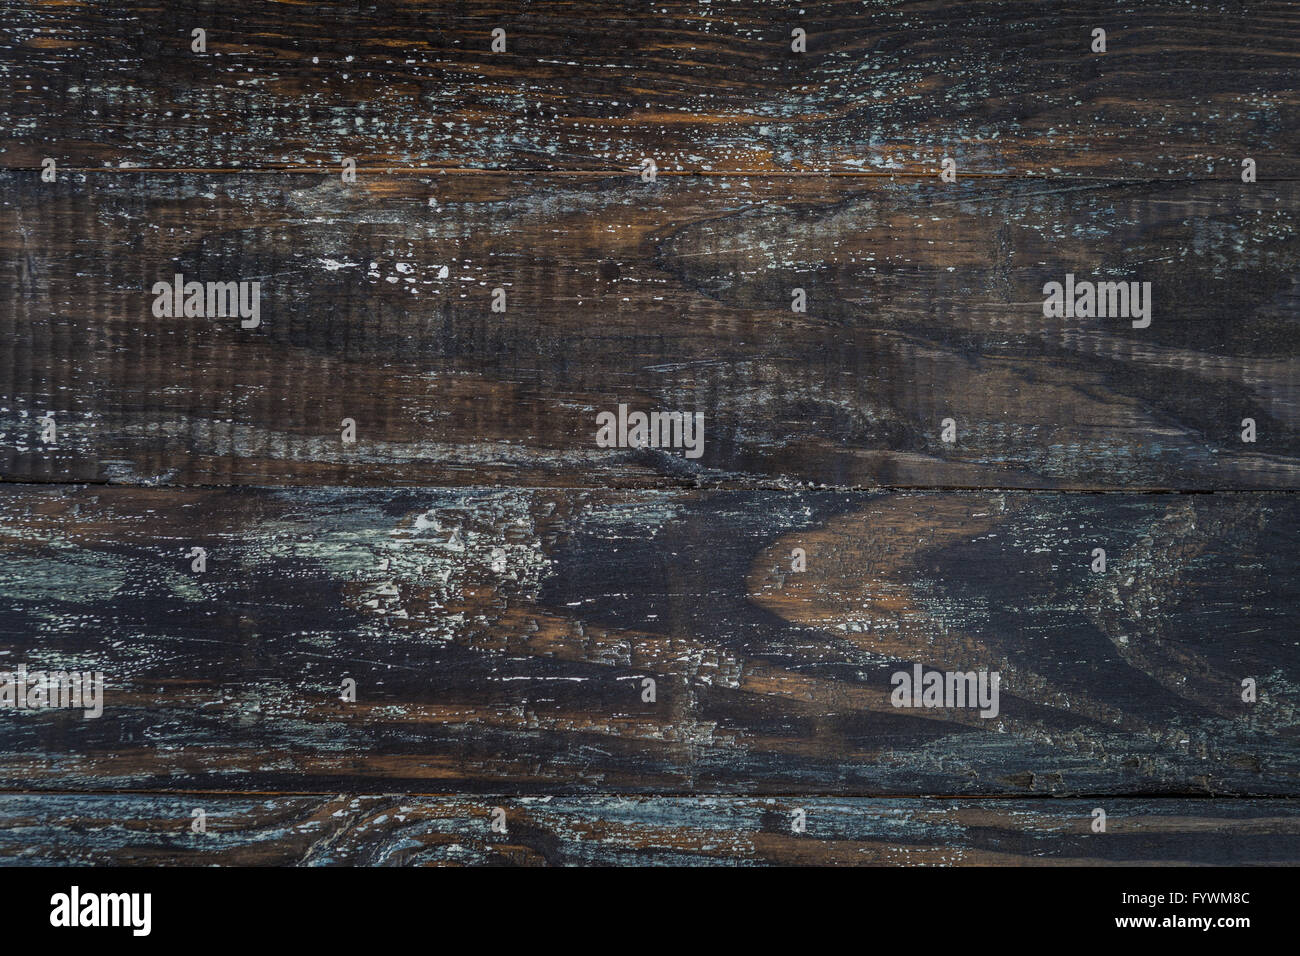 Grungy wooden background. Old rustic natural wood with peeling white paint Stock Photo